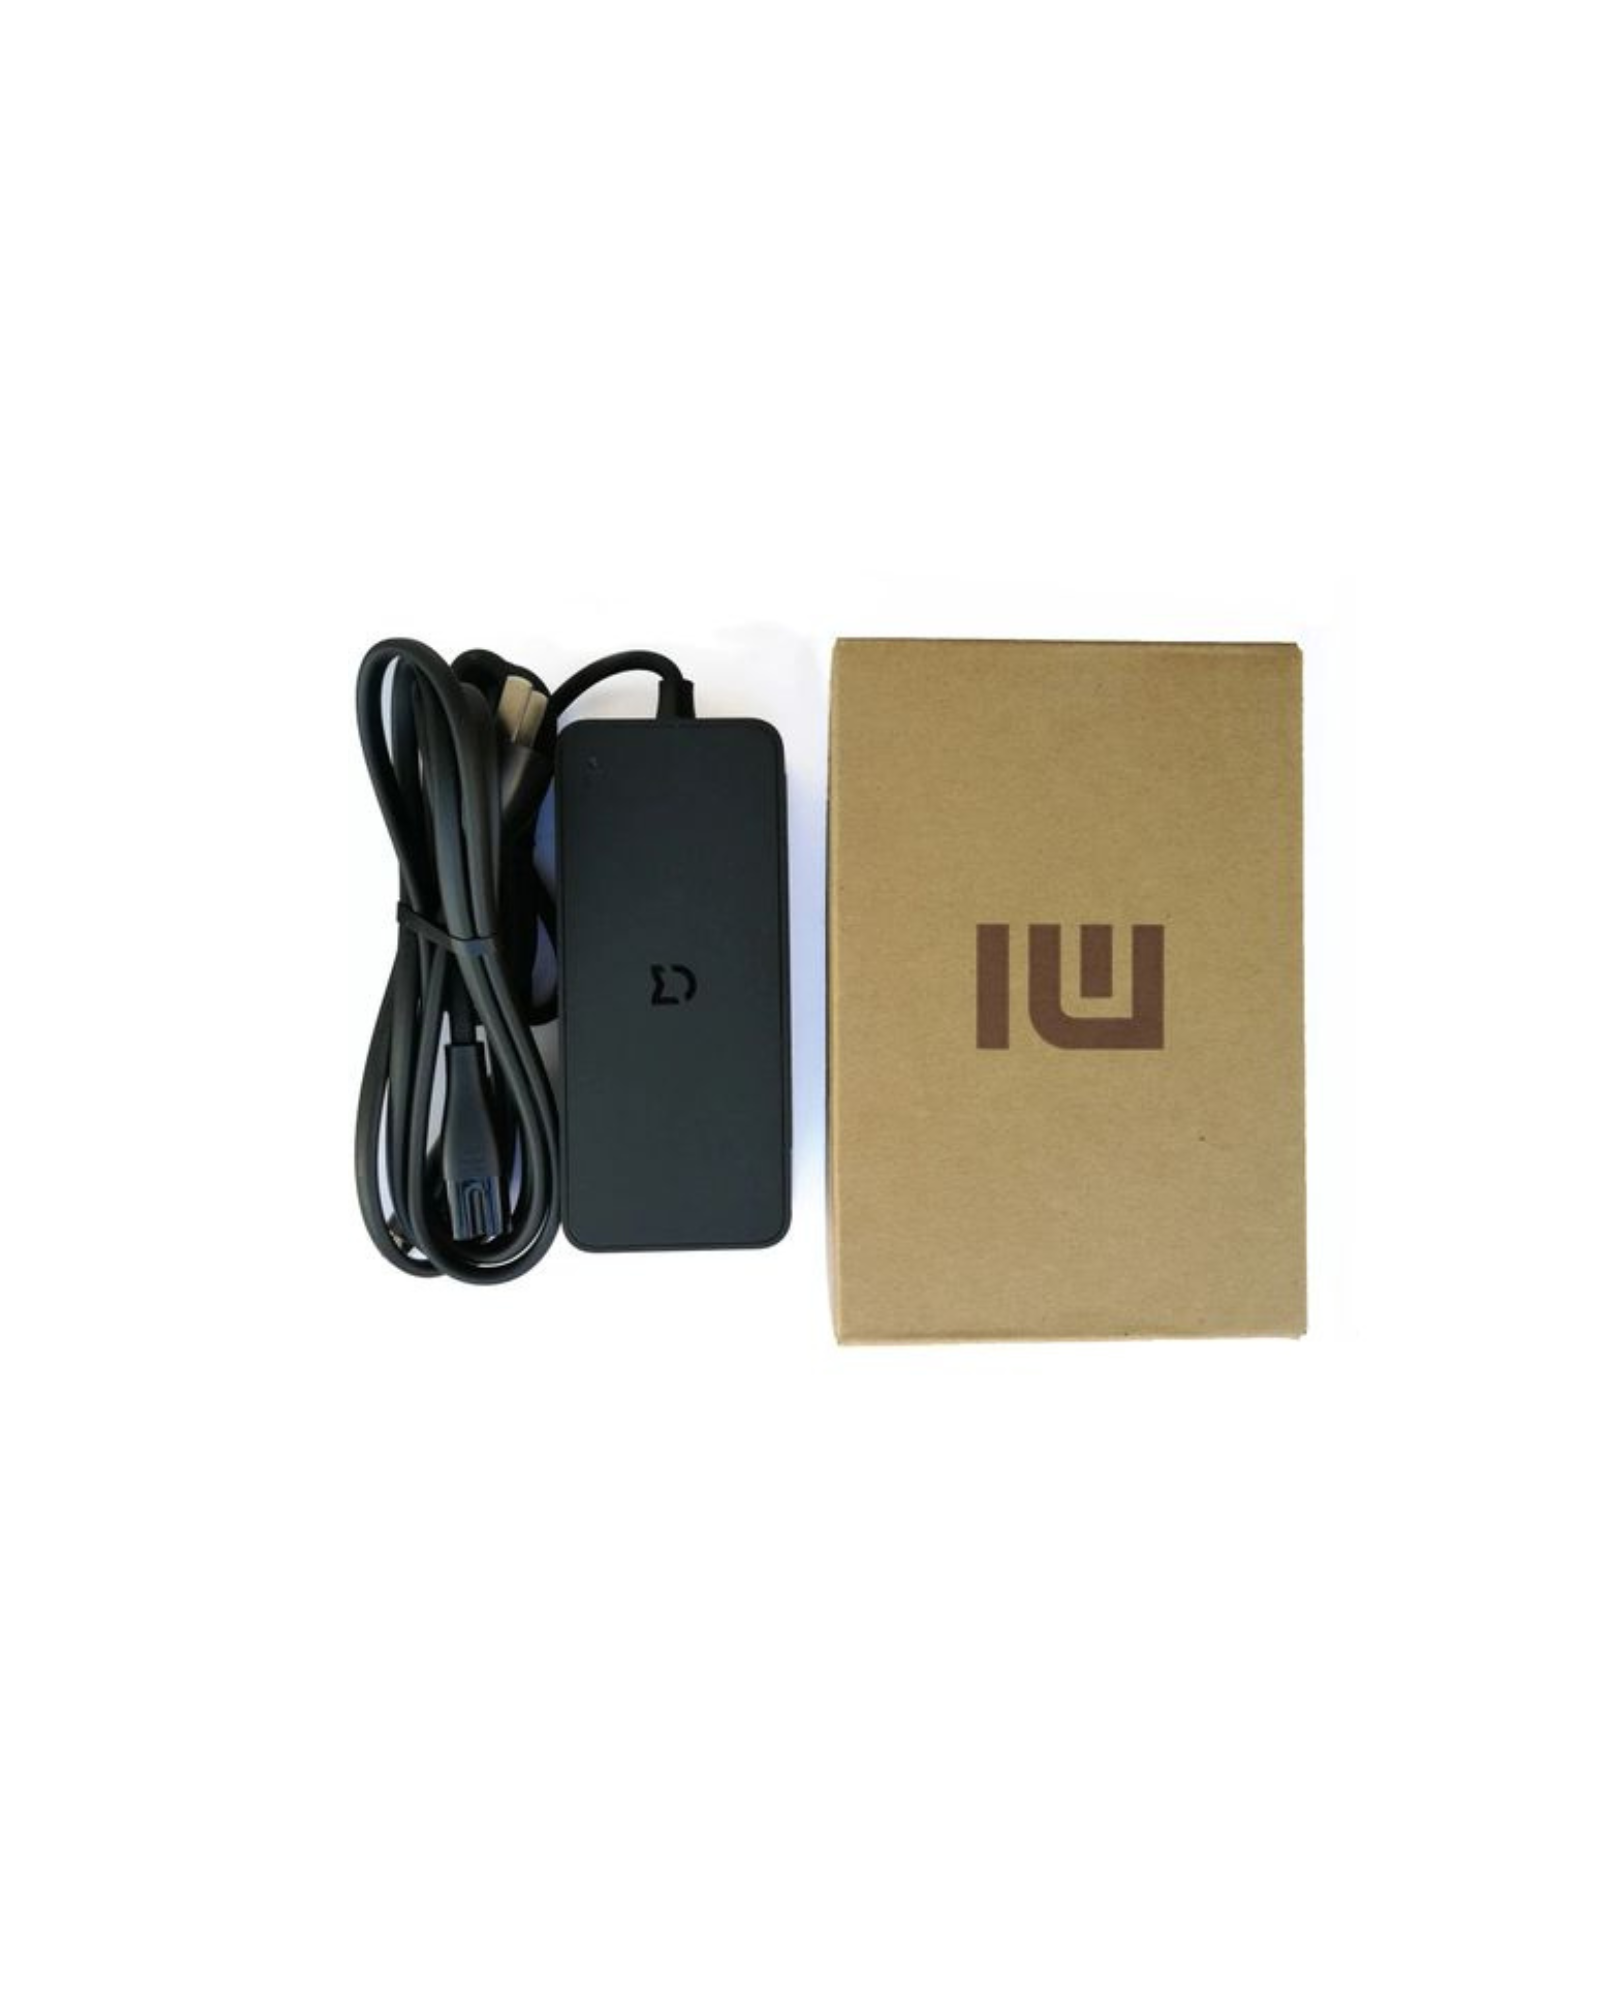 https://ezone.ma/wp-content/uploads/2023/07/CHARGEUR-XIAOMI-4.png